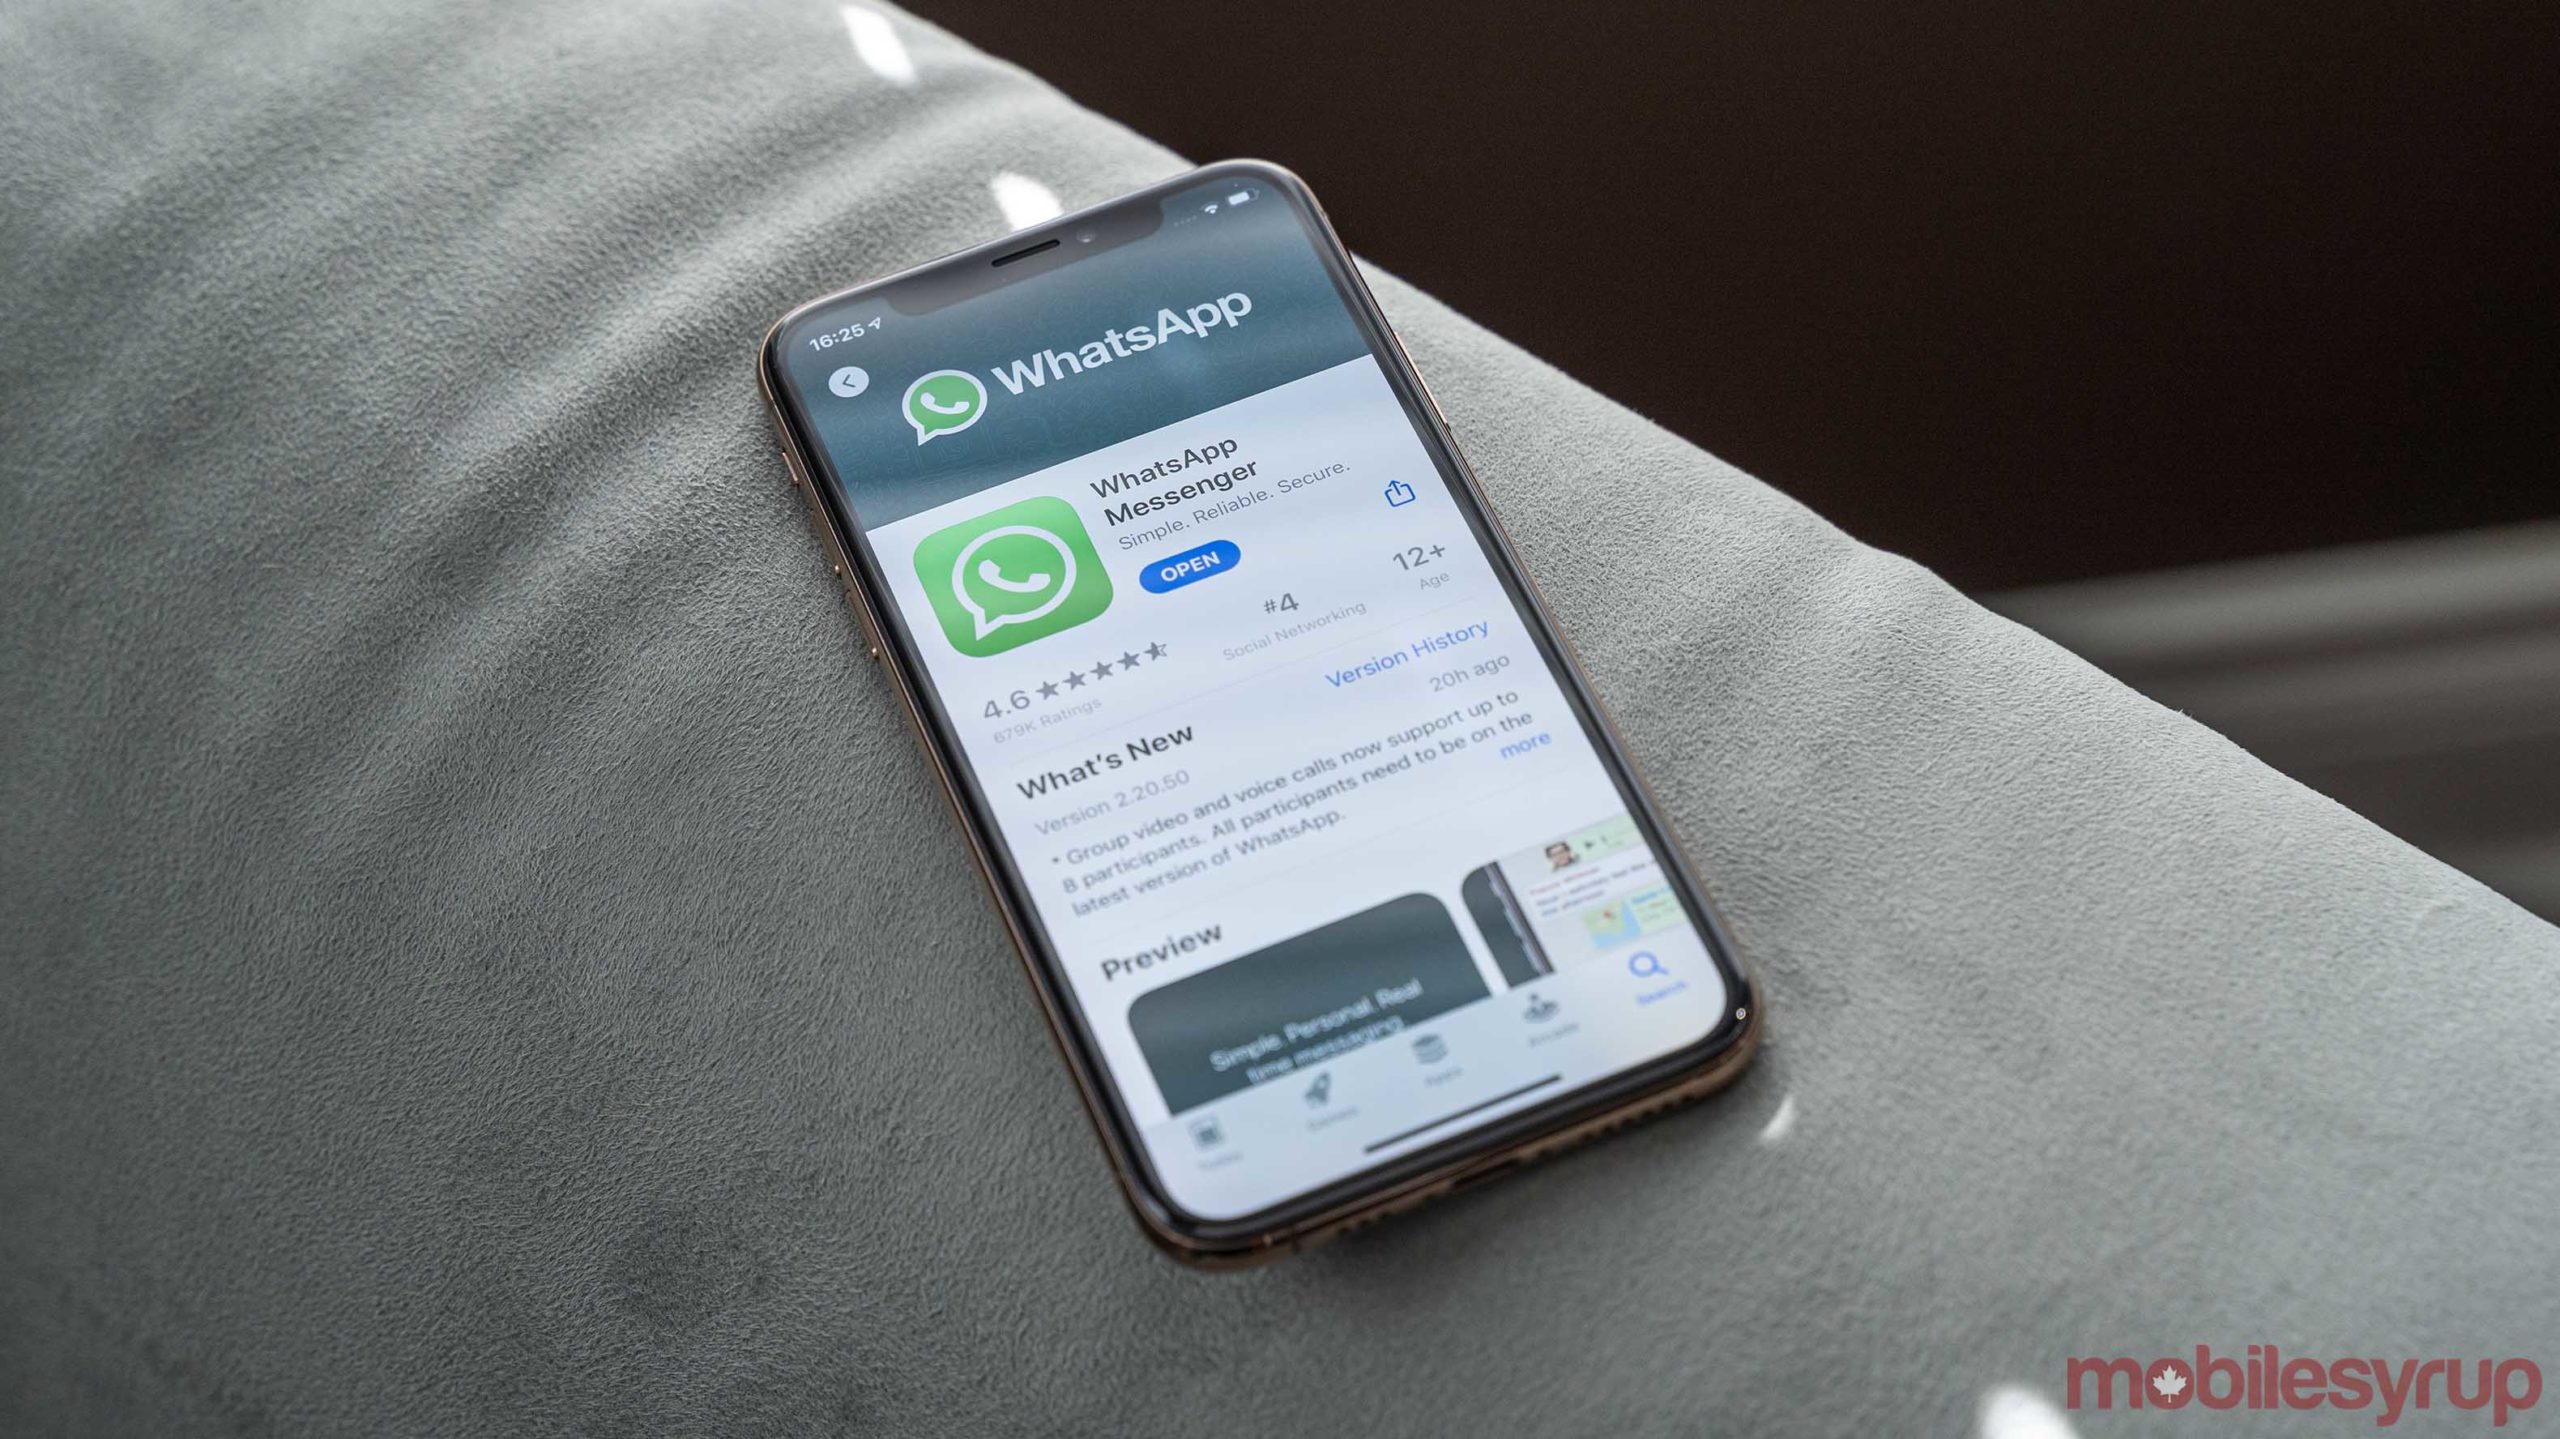 Whatsapp Using Its Story Like Feature To Reassure Users About Privacy Bio theverge.com covers life in the future. whatsapp using its story like feature